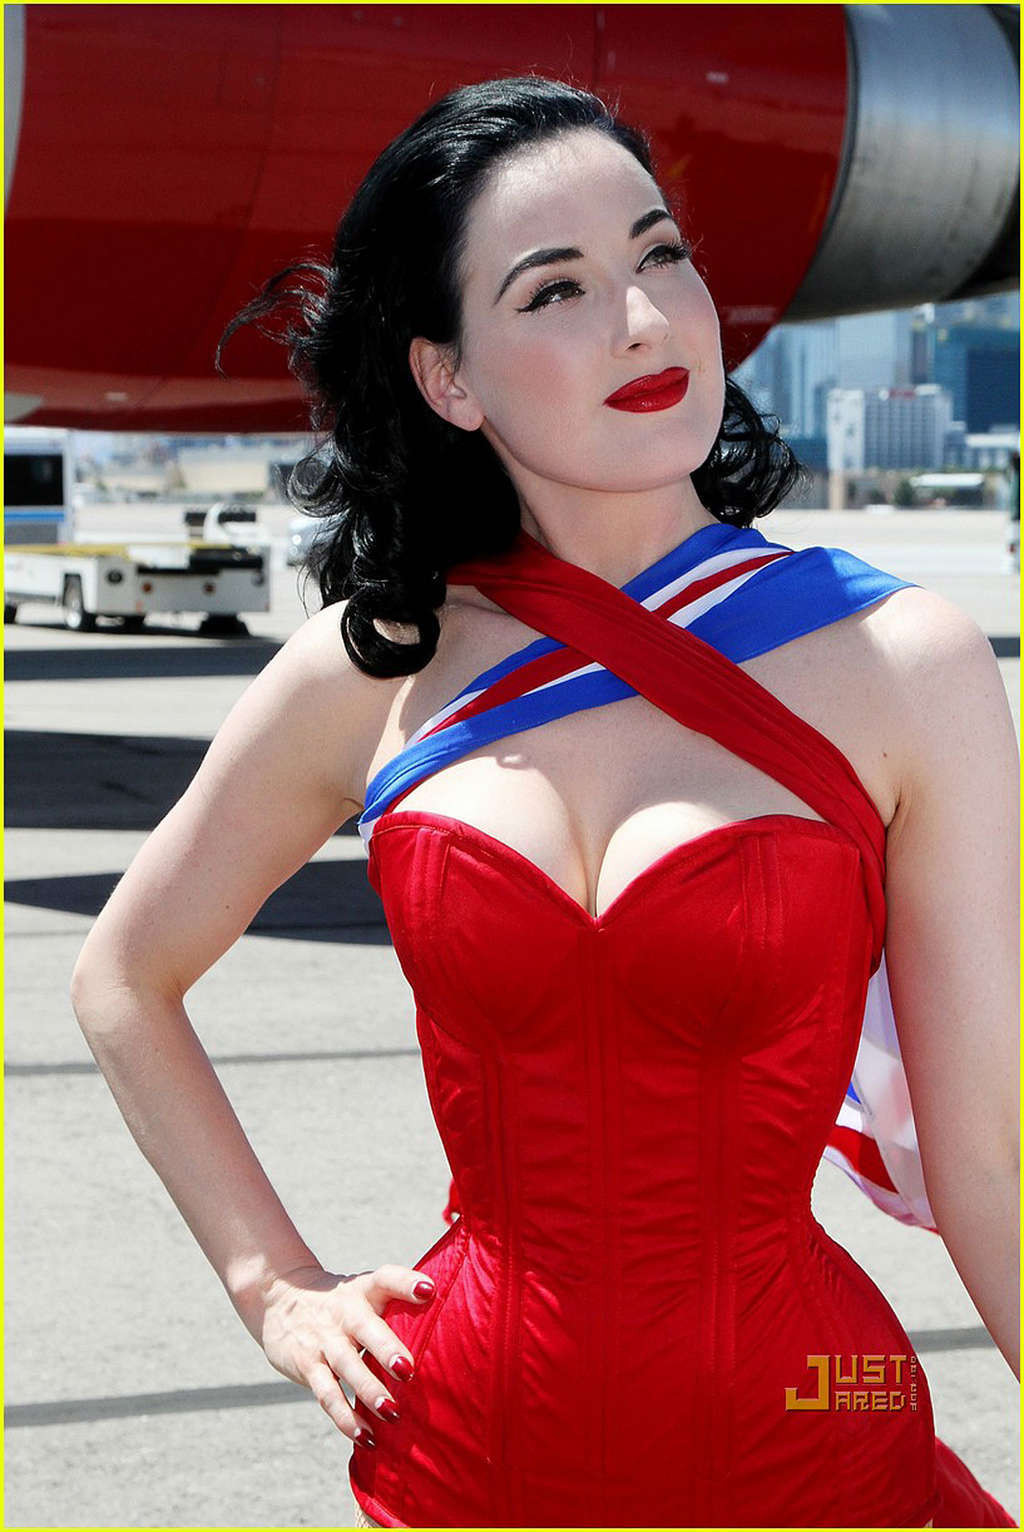 Dita Von Teese looking sexy in red outfit and exposing her tits #75343955